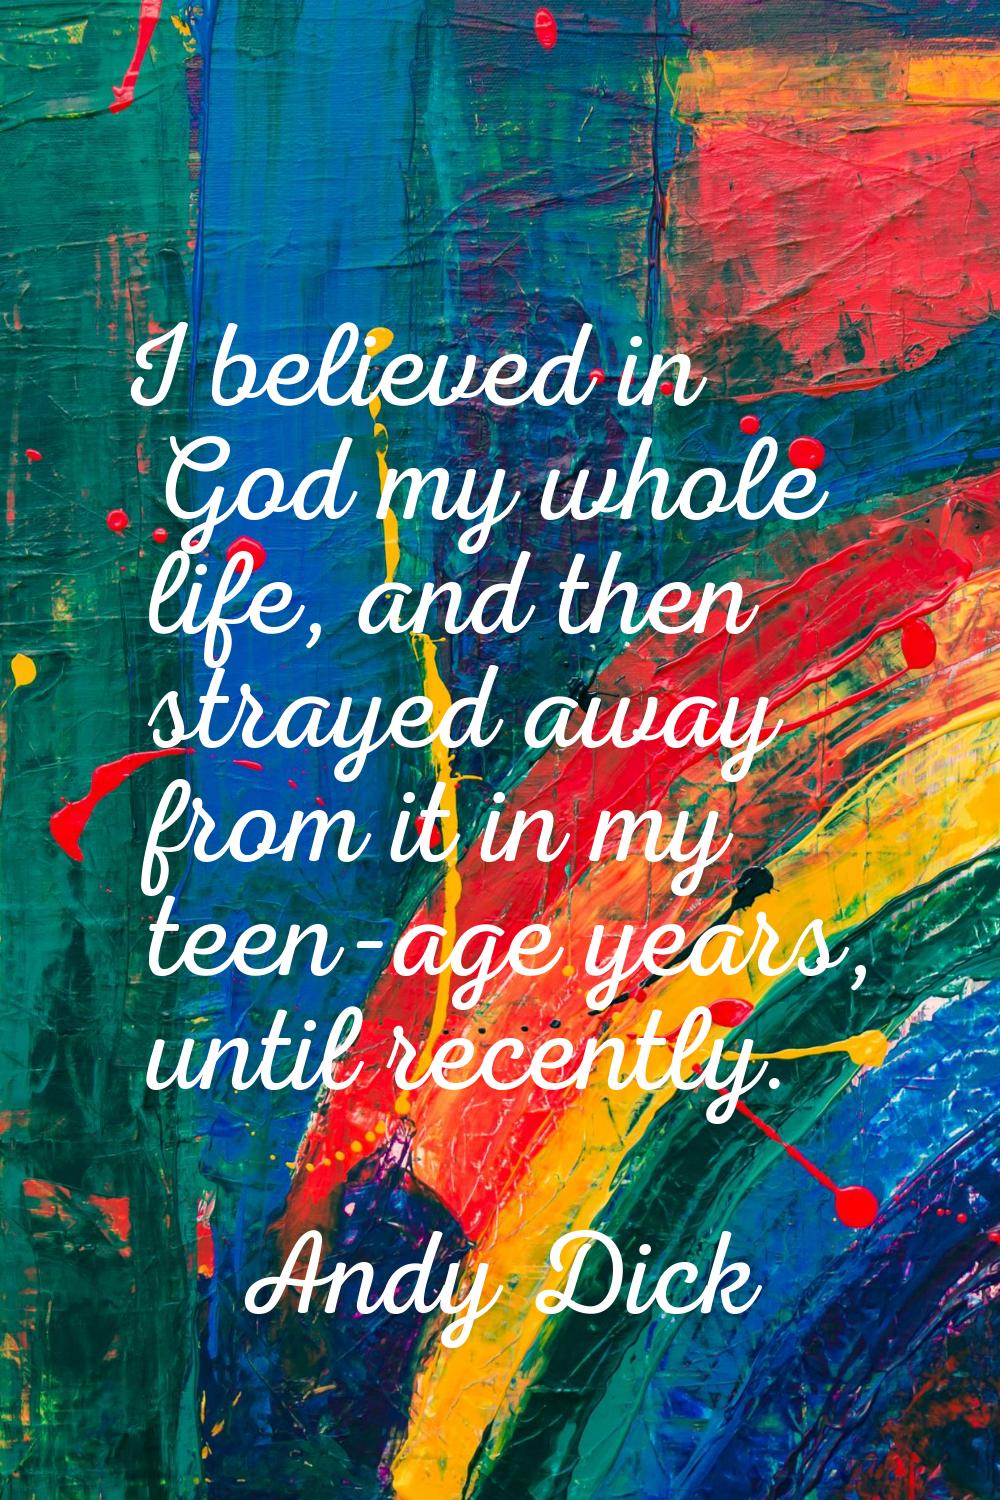 I believed in God my whole life, and then strayed away from it in my teen-age years, until recently